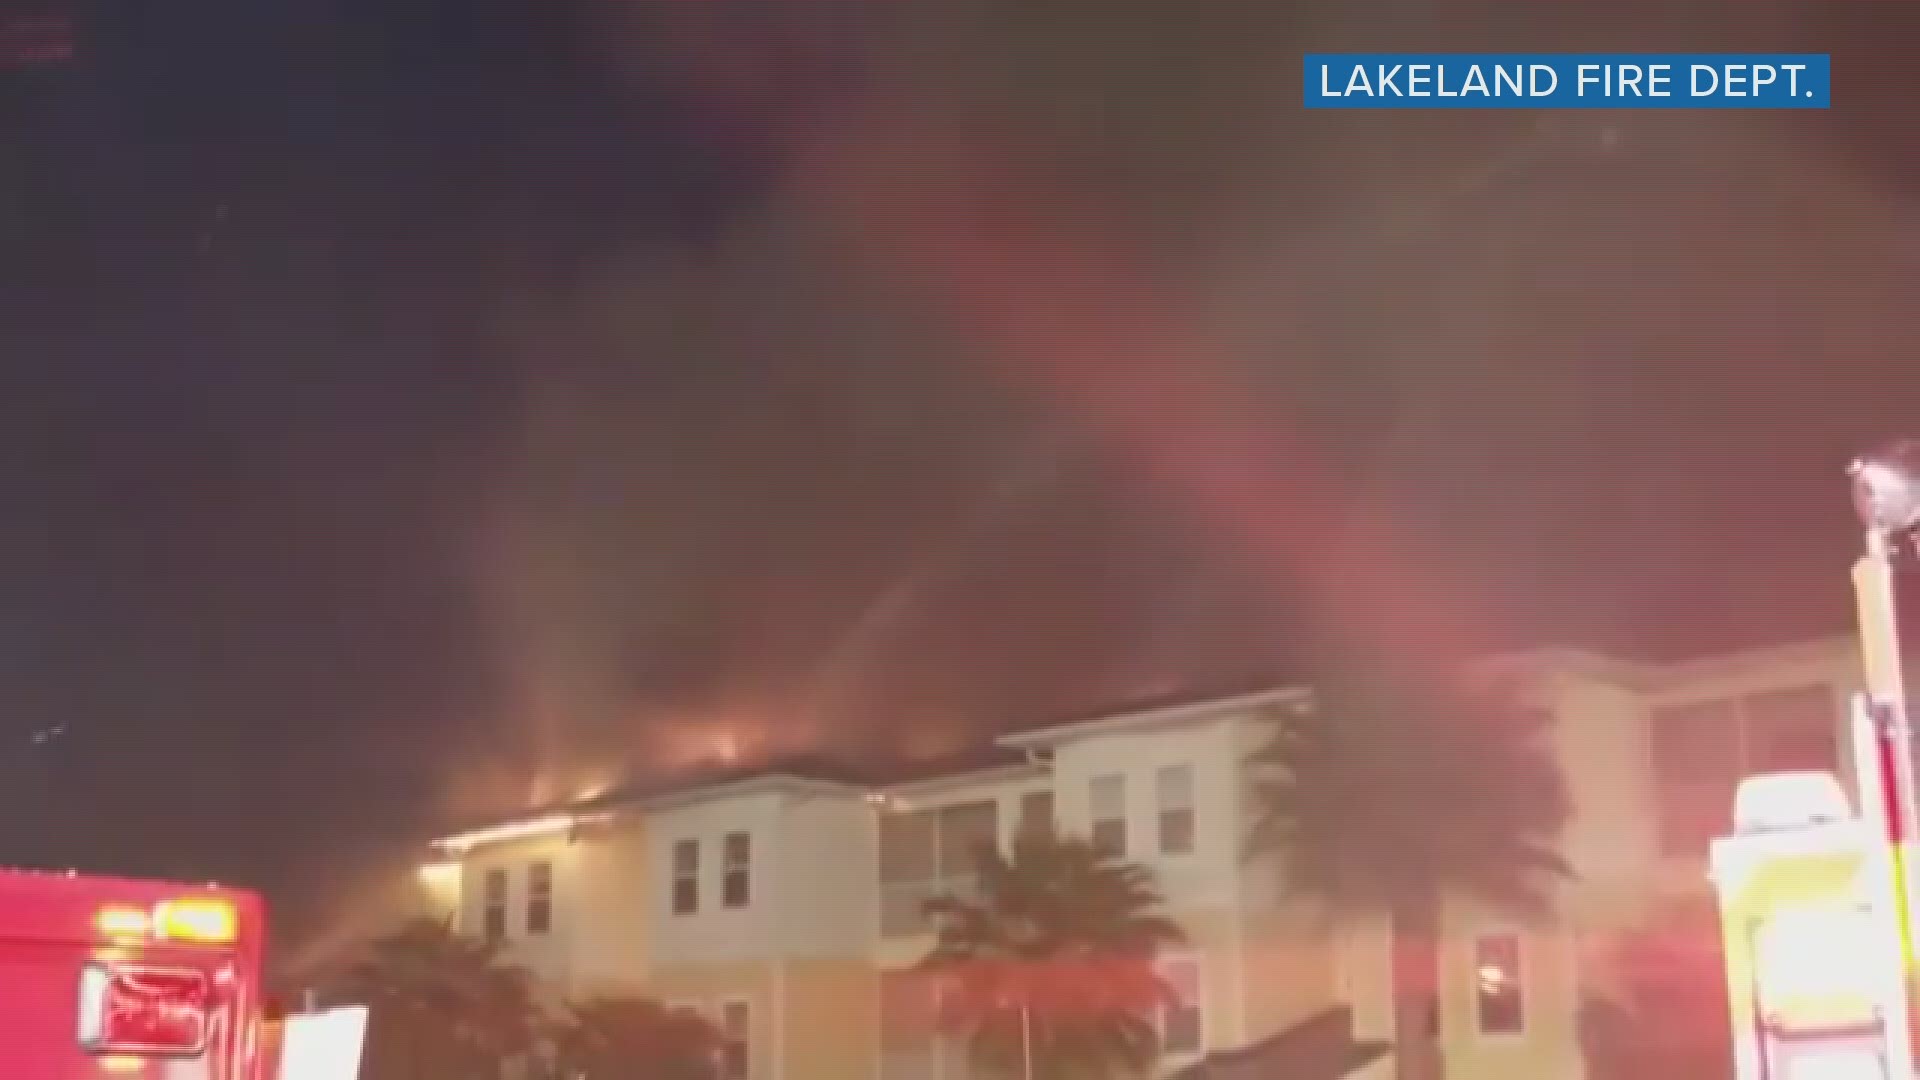 Residents at a Lakeland apartment building have been displaced as a fire burns through its roof.